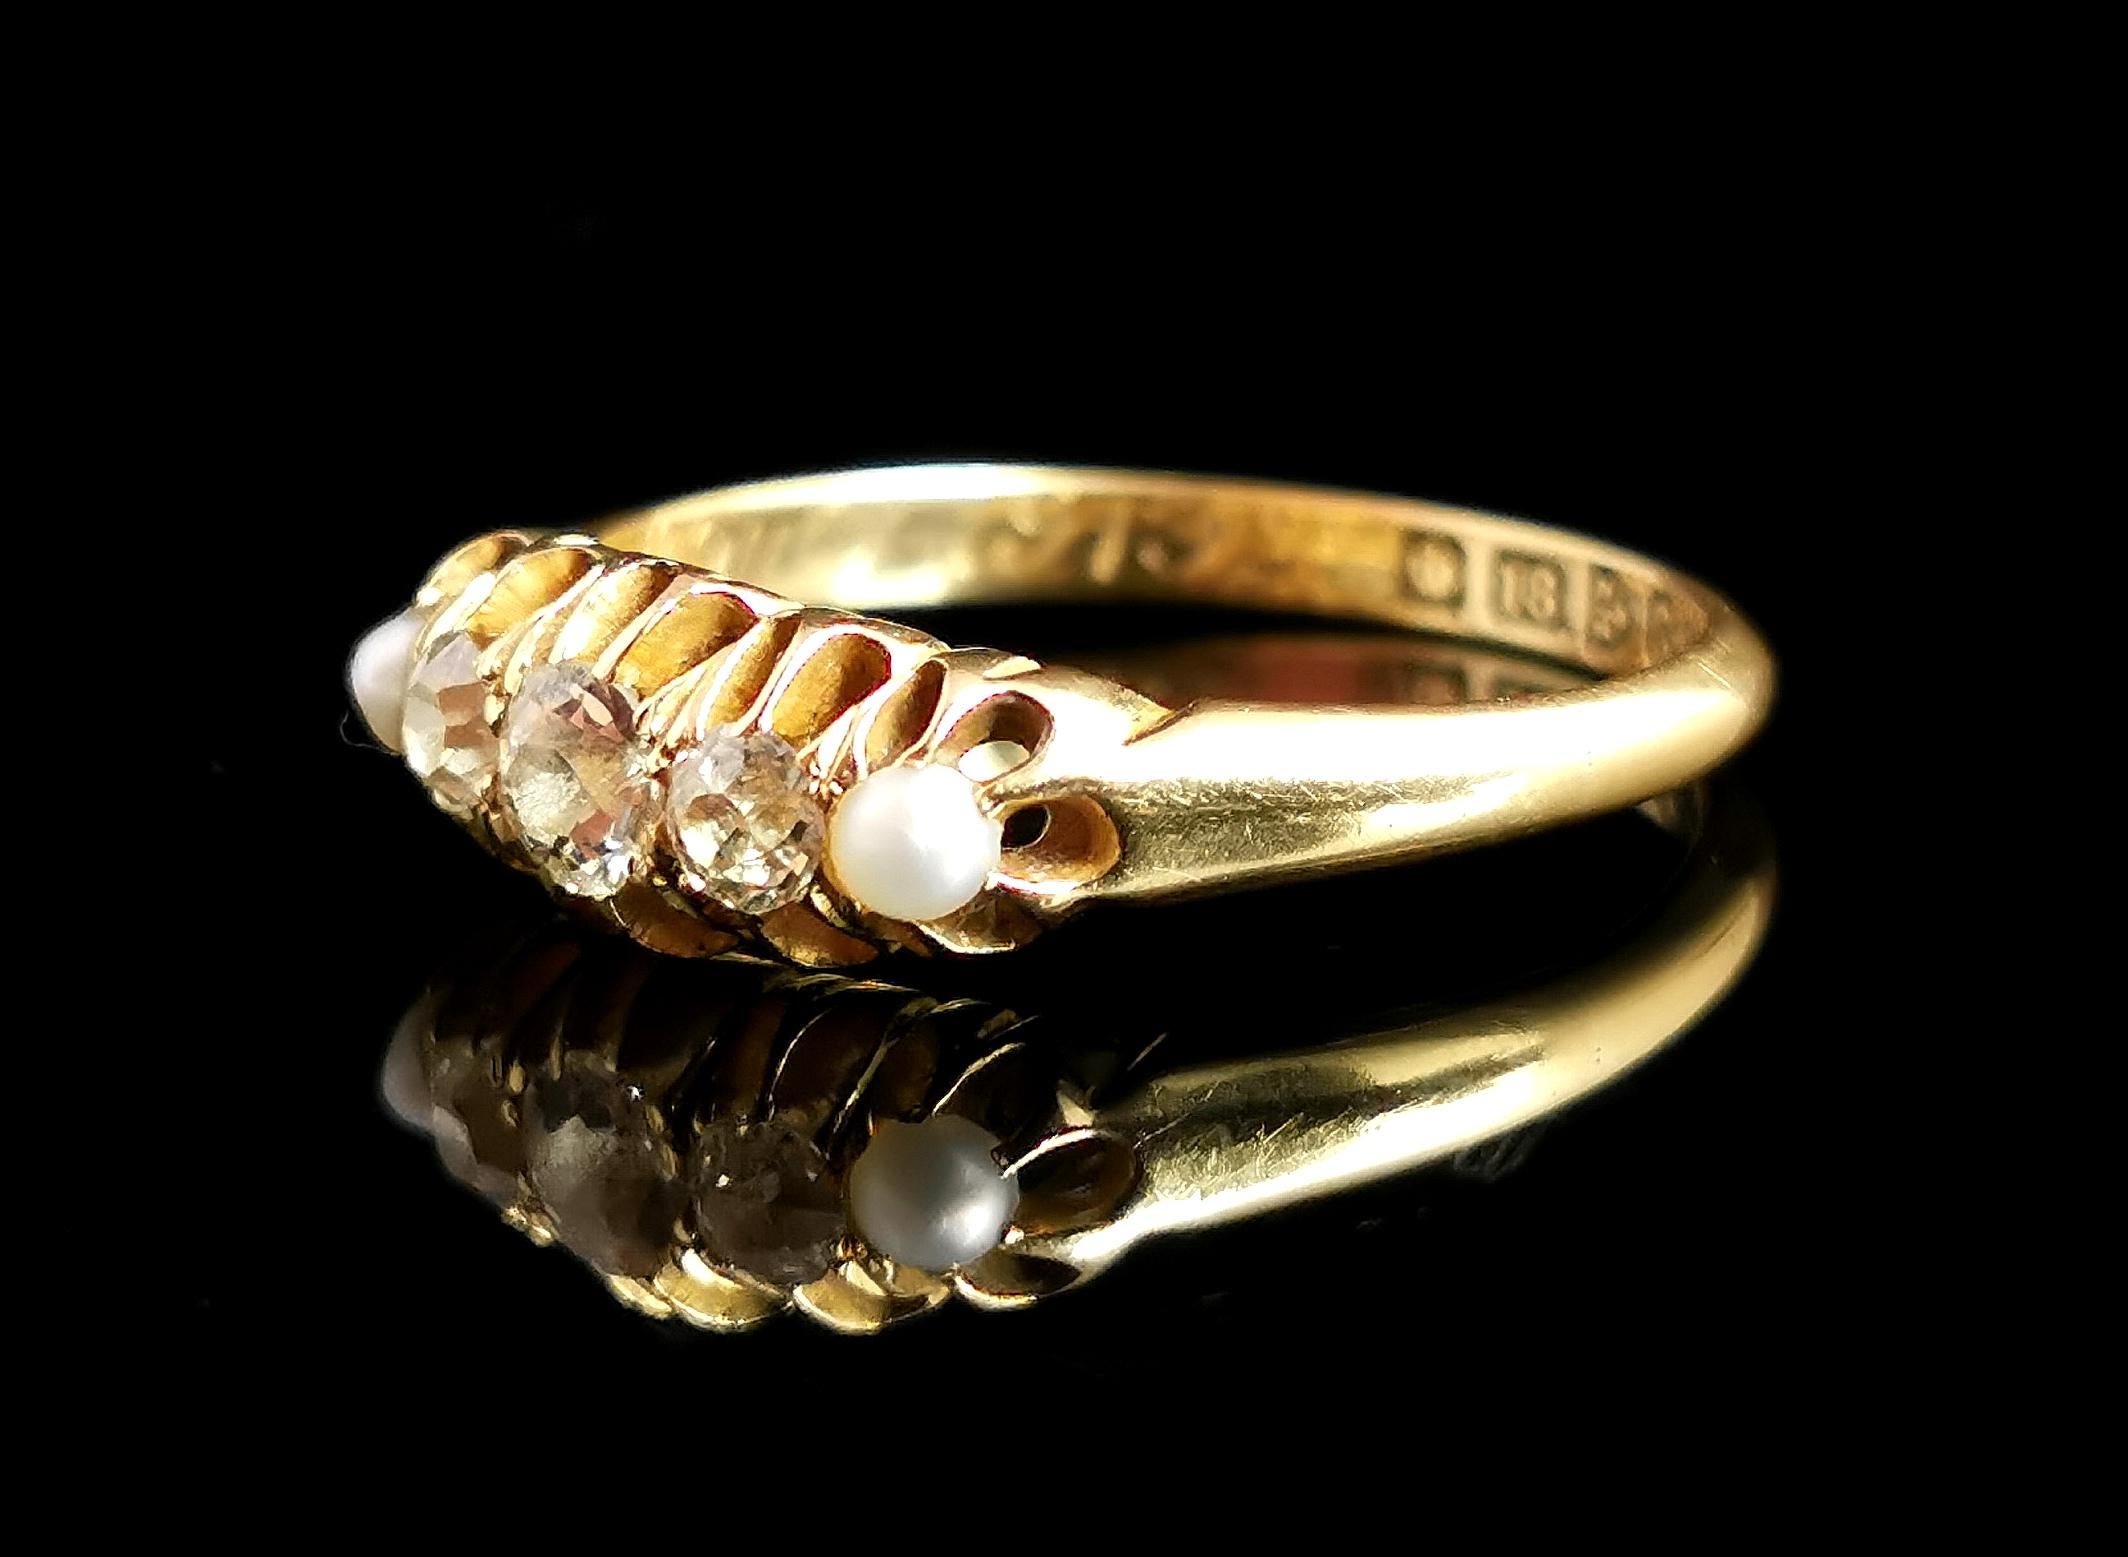 Women's Antique Diamond and Pearl Ring, Five Stone, 18k Yellow Gold, Edwardian